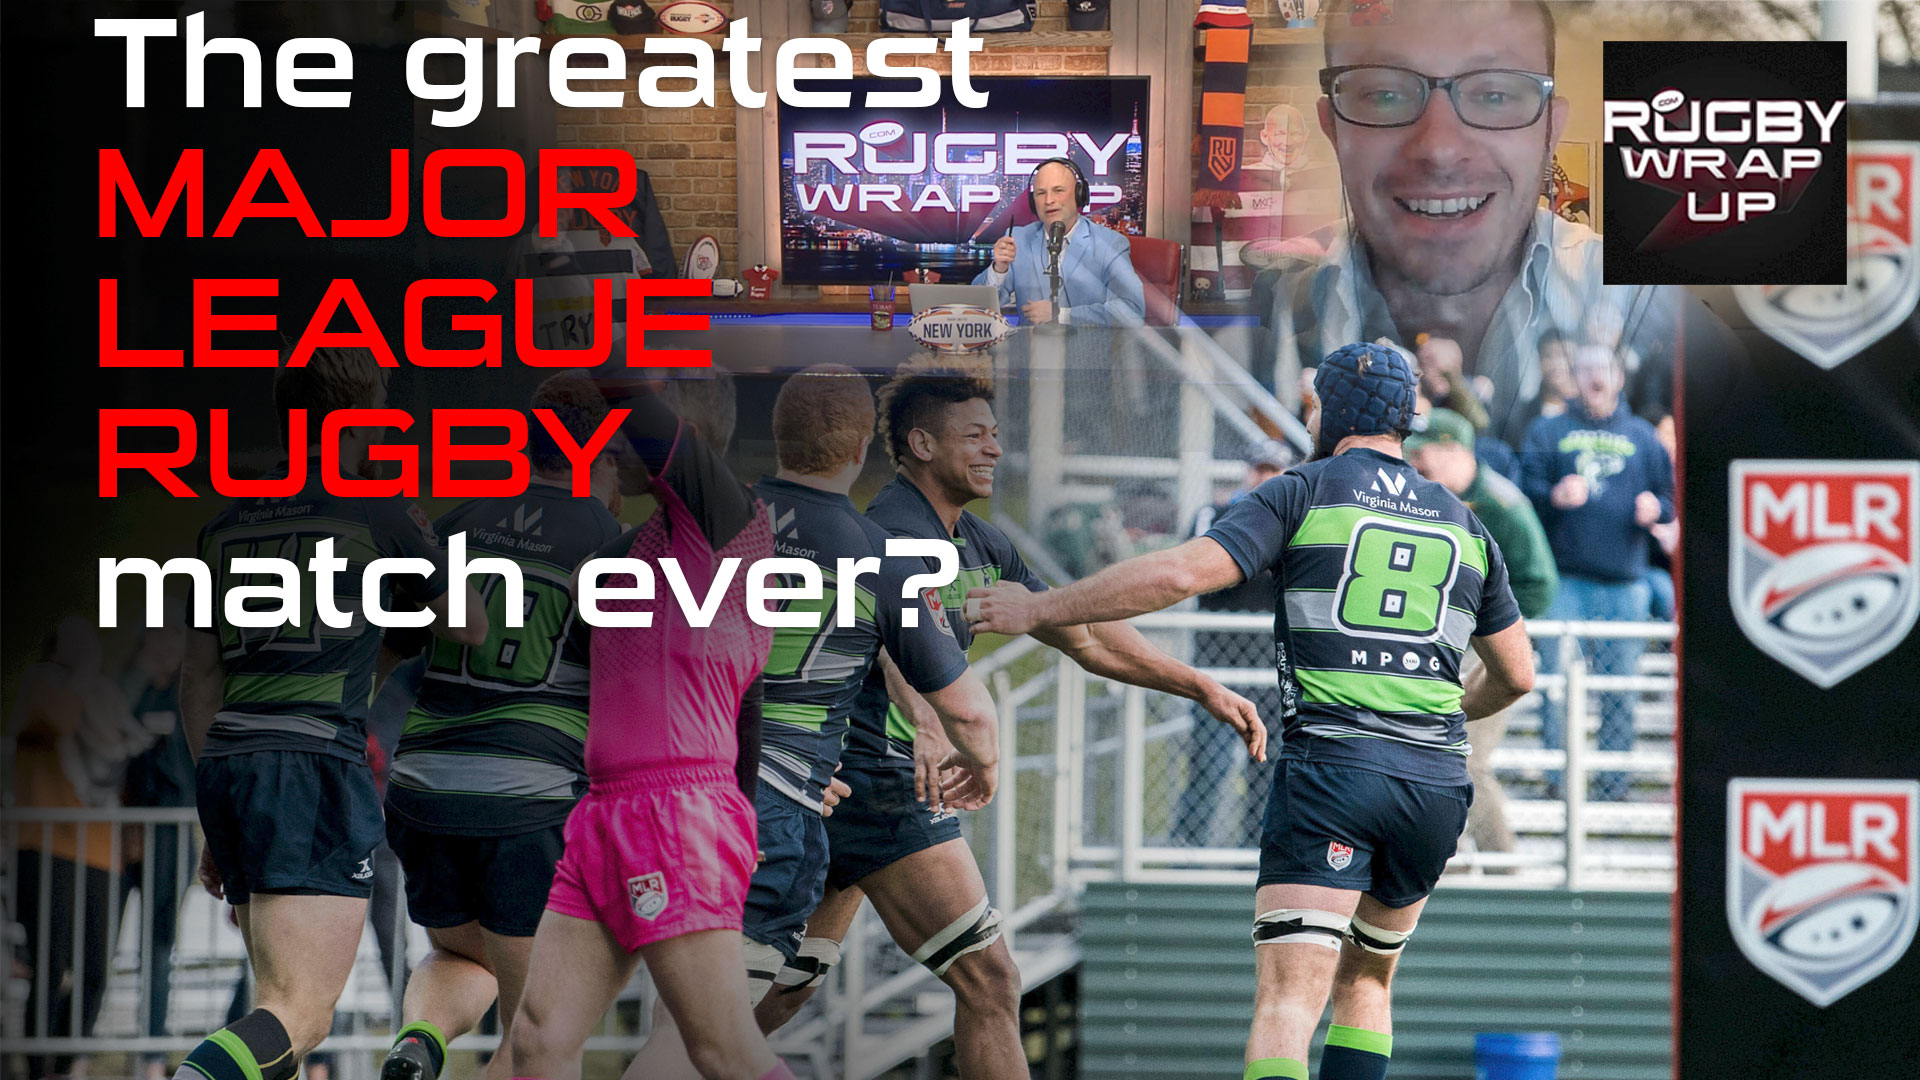 Major League Rugby Analysis, Highlights, Predications. Bryan Ray, Matt McCarthy, Rugby_Wrap_Up